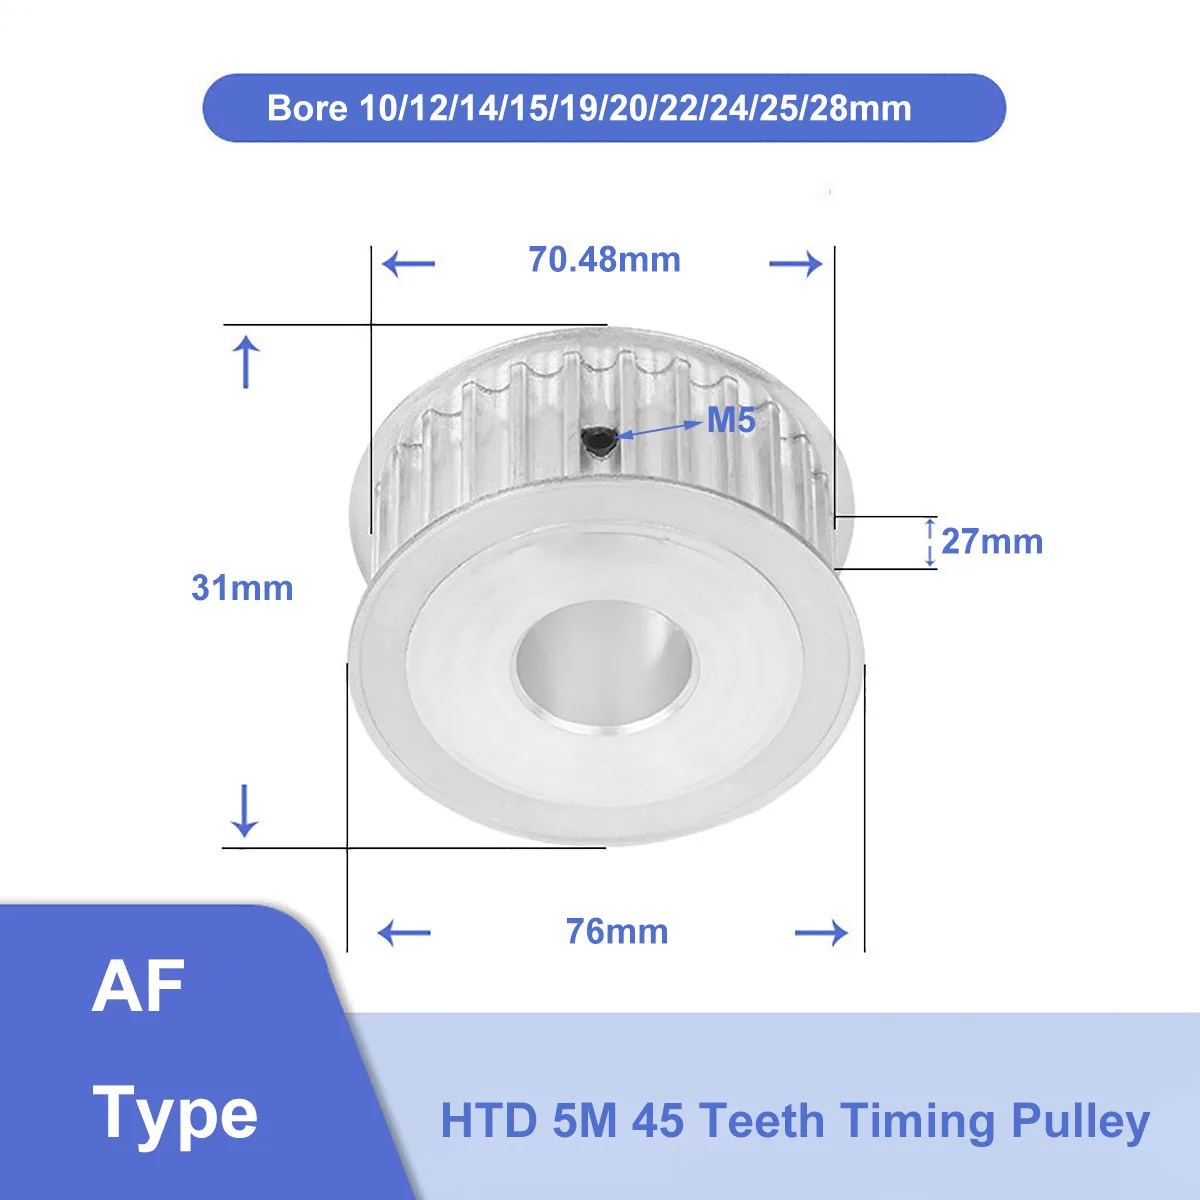 

HTD 5M 45 Teeth Timing Pulley Synchronus Wheel Bore 10mm - 28mm Aluminium Idler Pulley 5M-45T 27mm Width For HTD5M Timing Belt